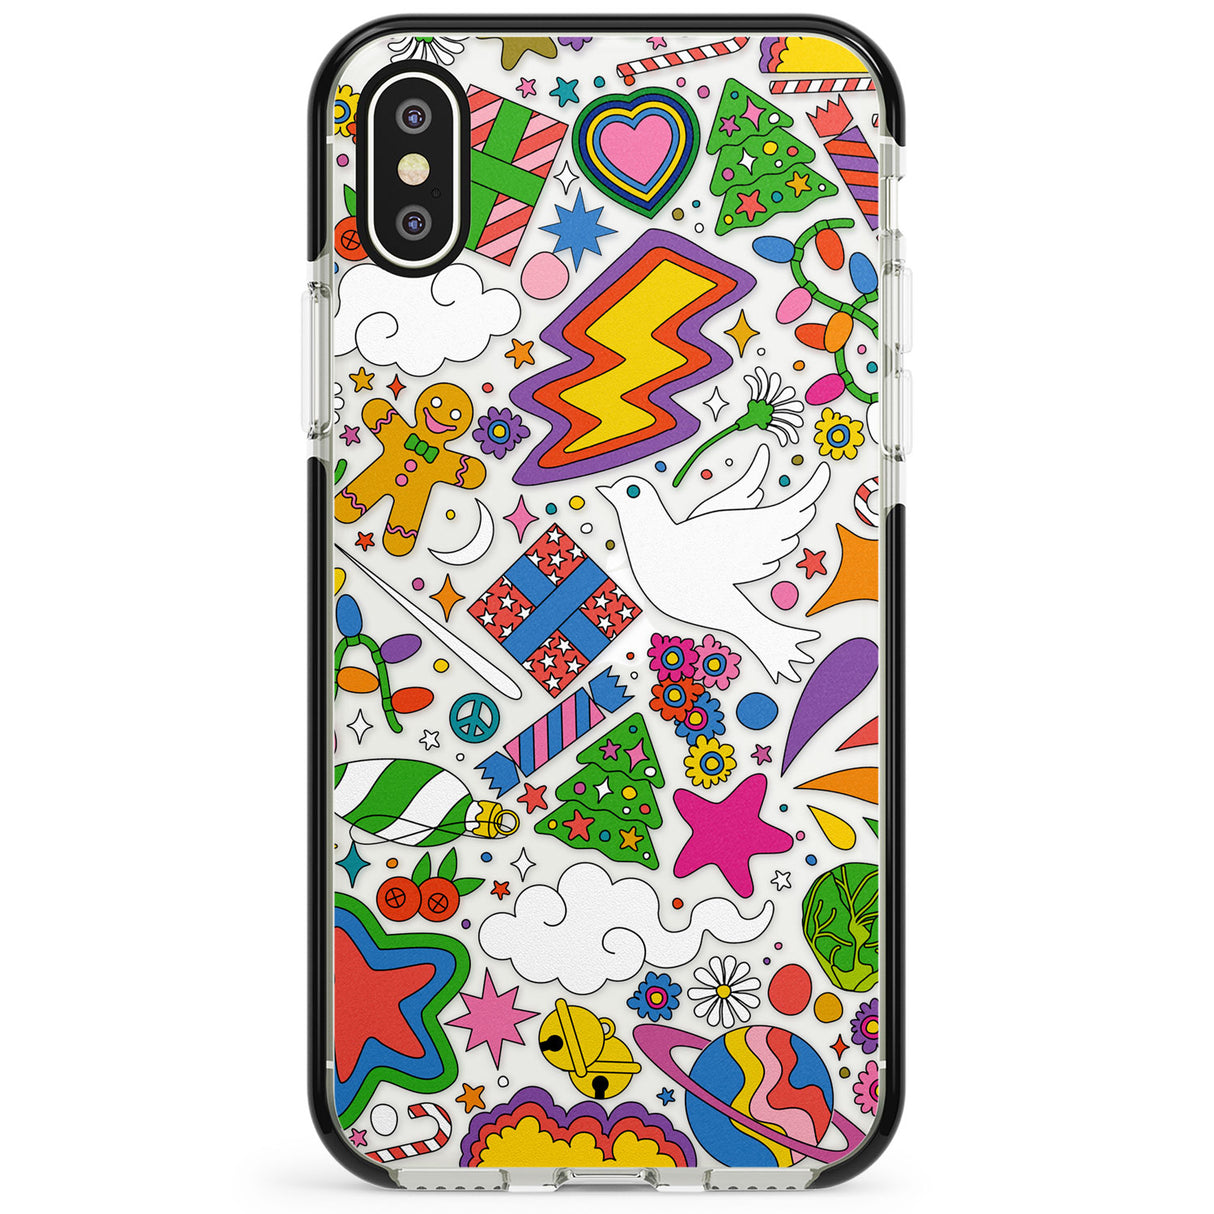 Whimsical Wonderland Phone Case for iPhone X XS Max XR